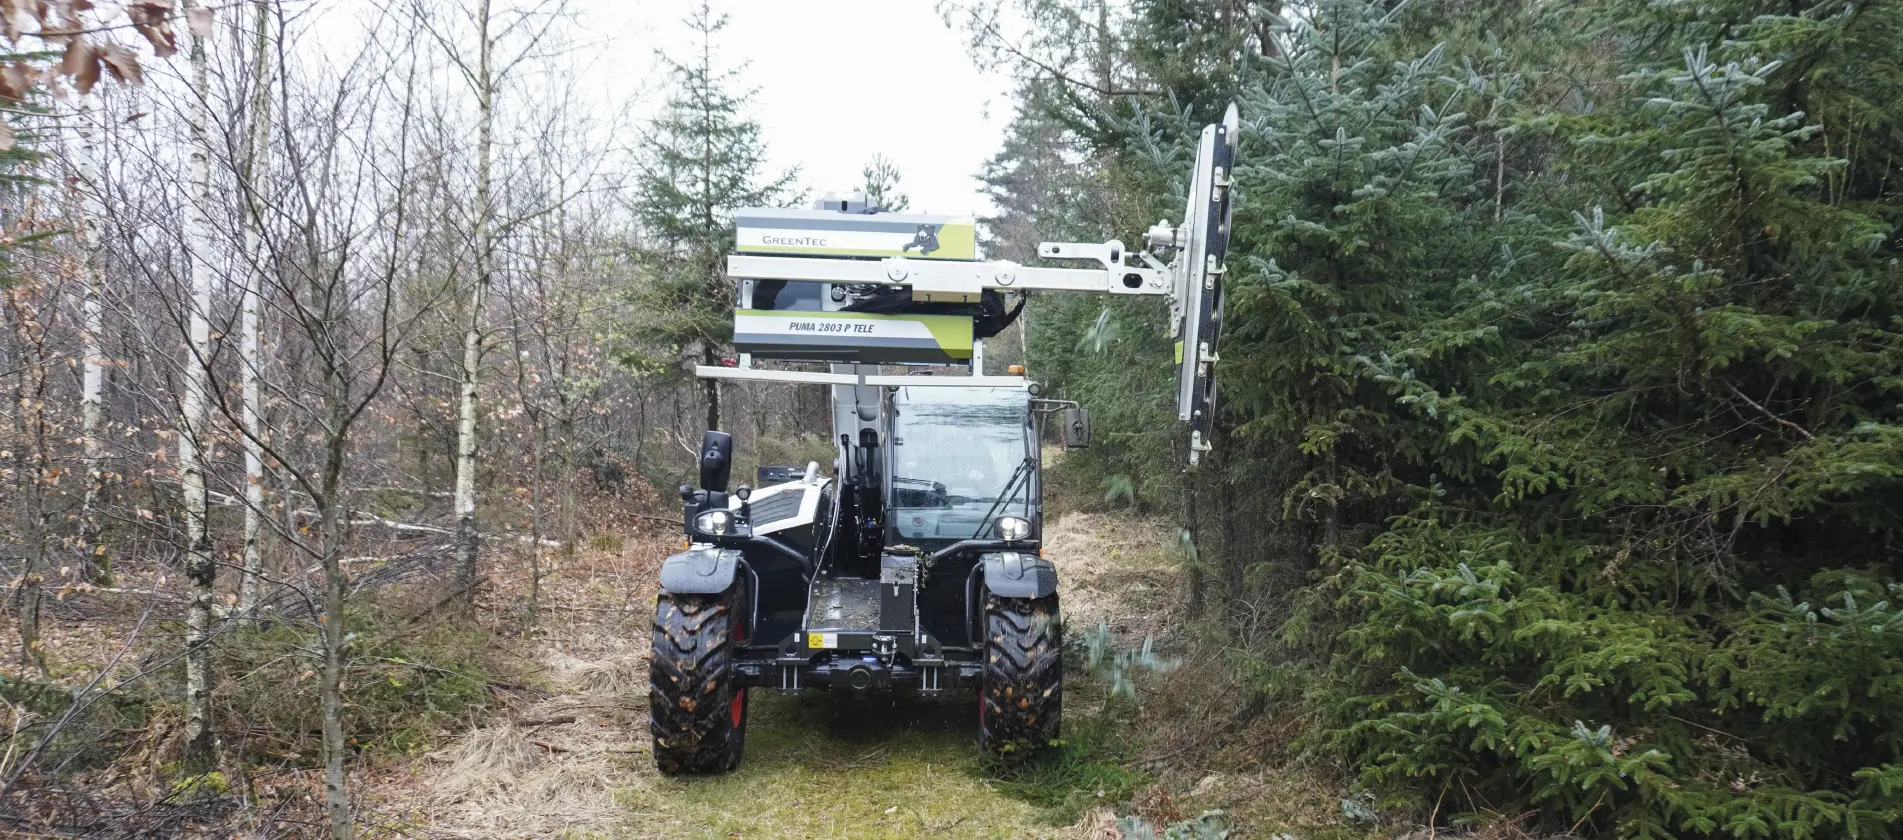 Tree trimming in forest with GreenTec machines